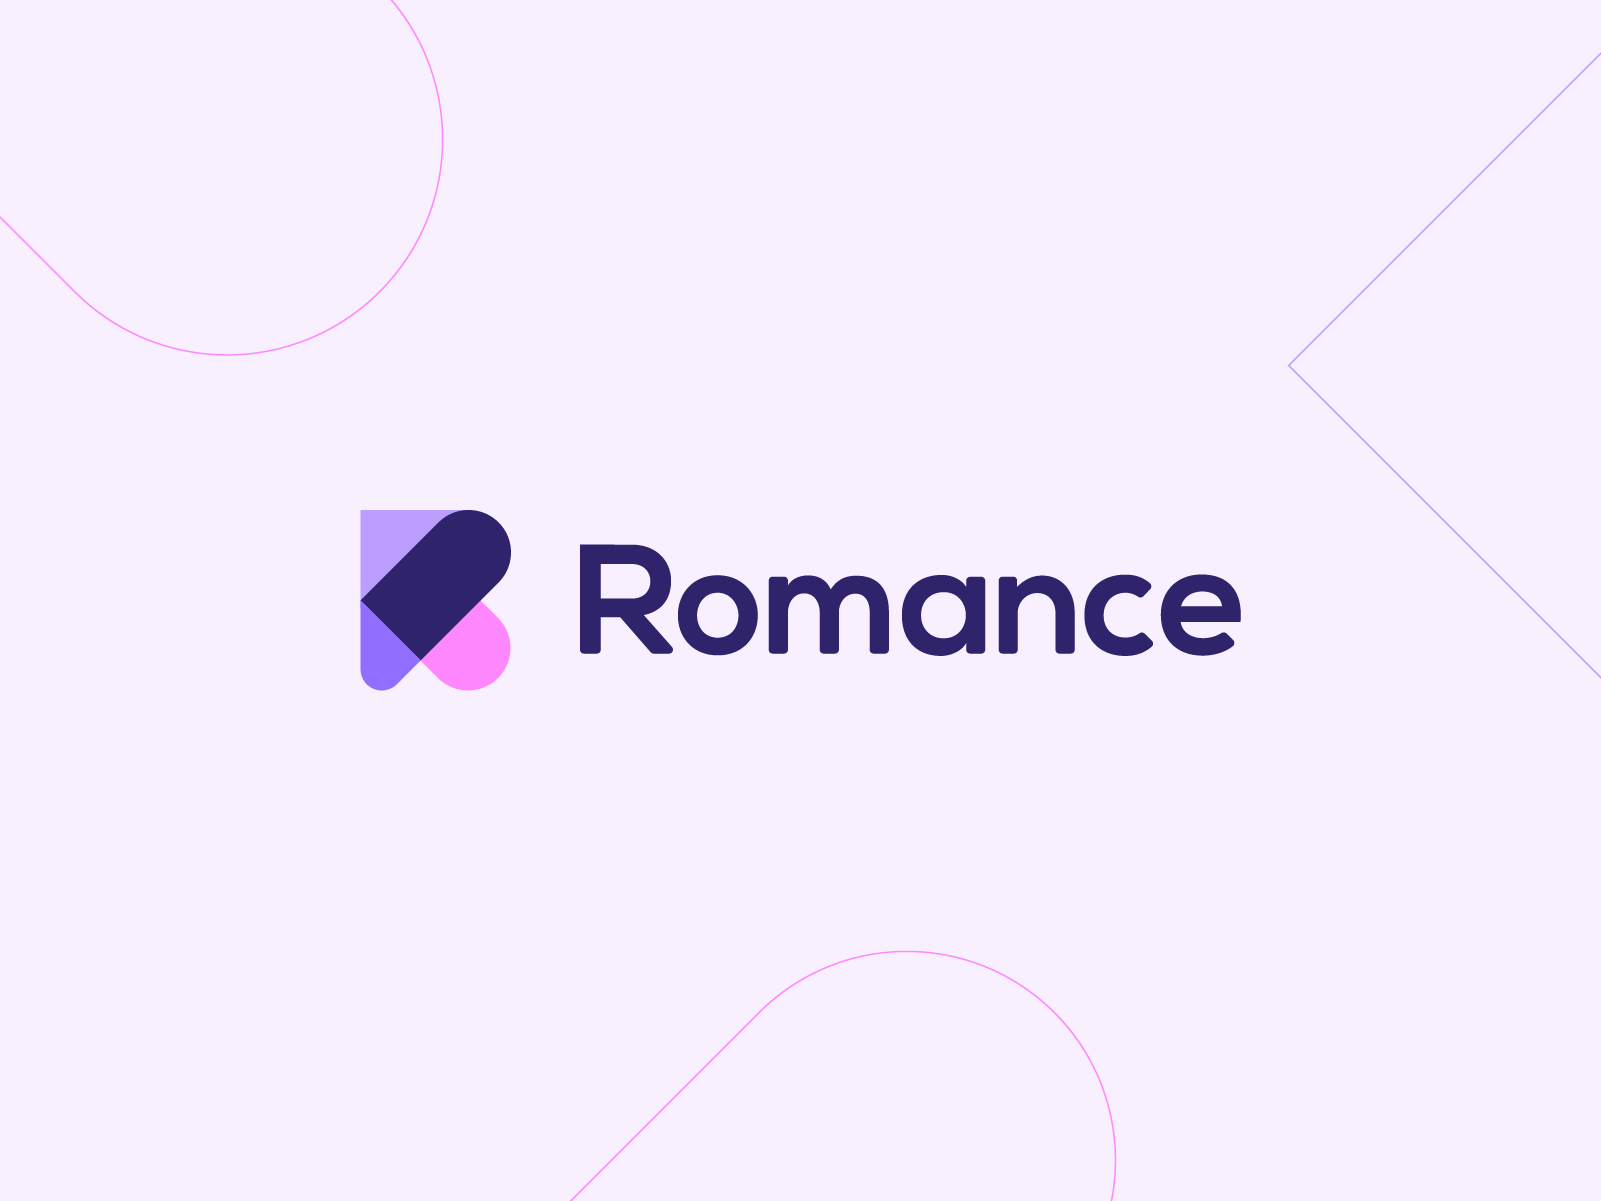 Romance by Ahmed creatives on Dribbble